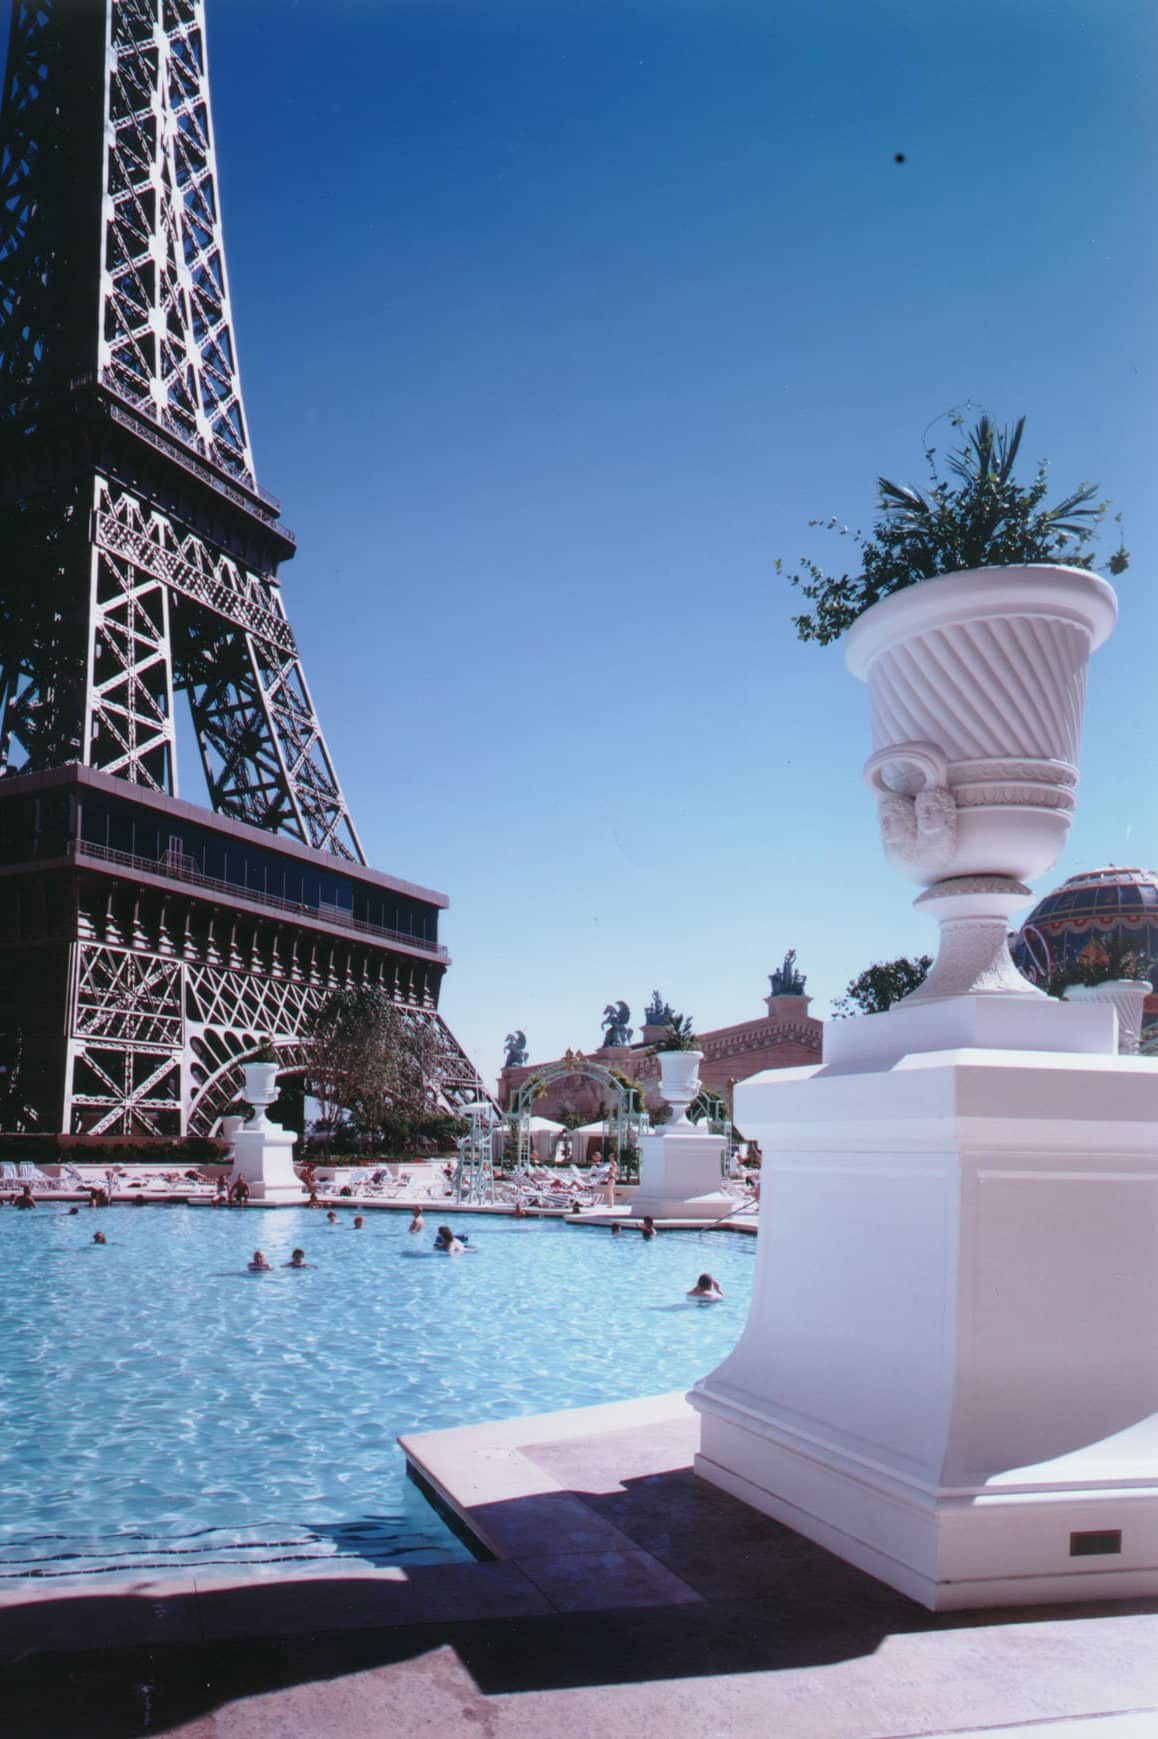 Paris Hotel pool with tower view and planter